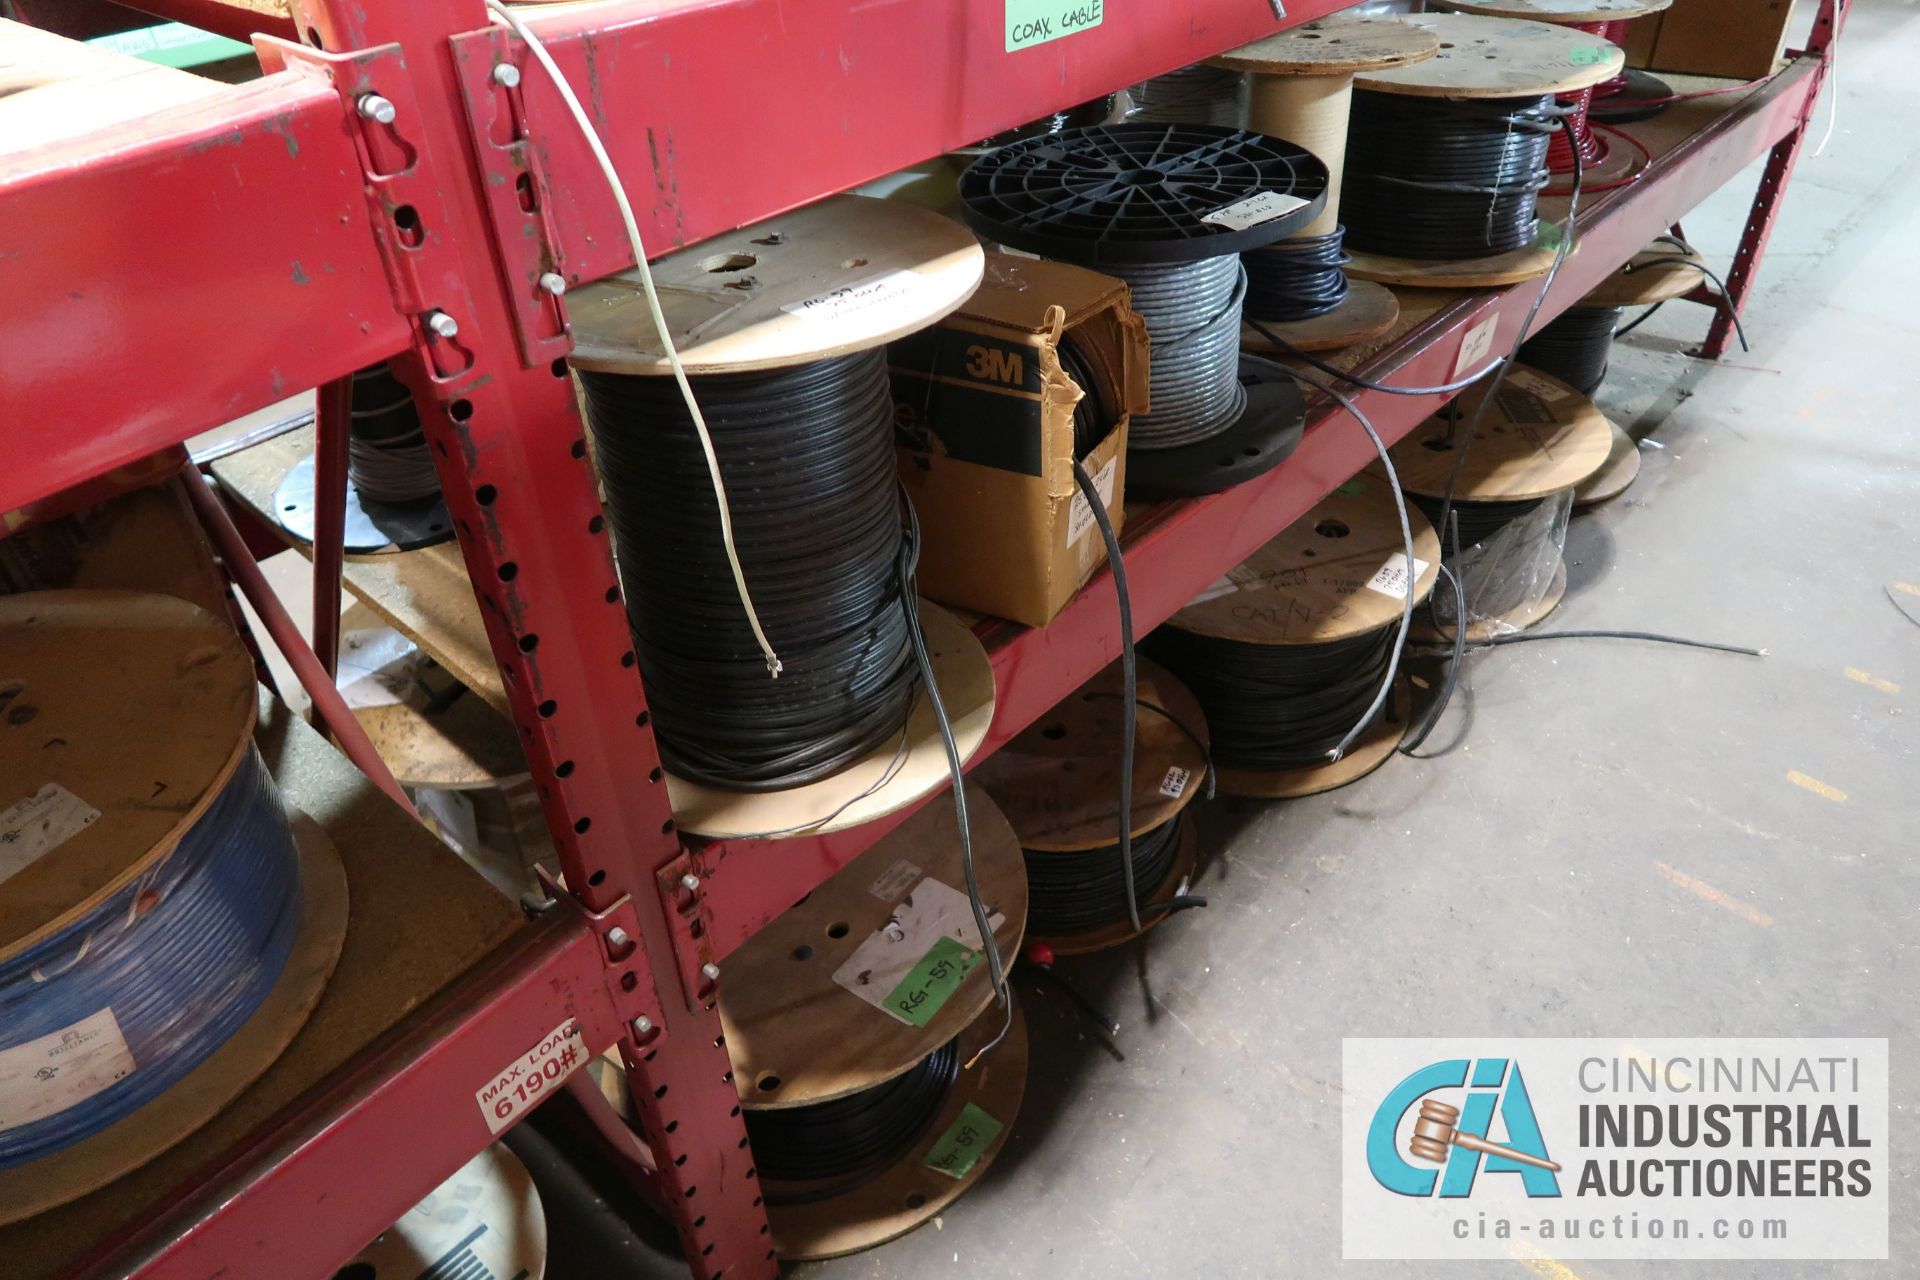 (LOT) LARGE QUANTITY OF COAX CABLE ON (3) SECTIONS RED RACK - MOSTLY BY BELDEN AND UNREEL - - Image 7 of 14